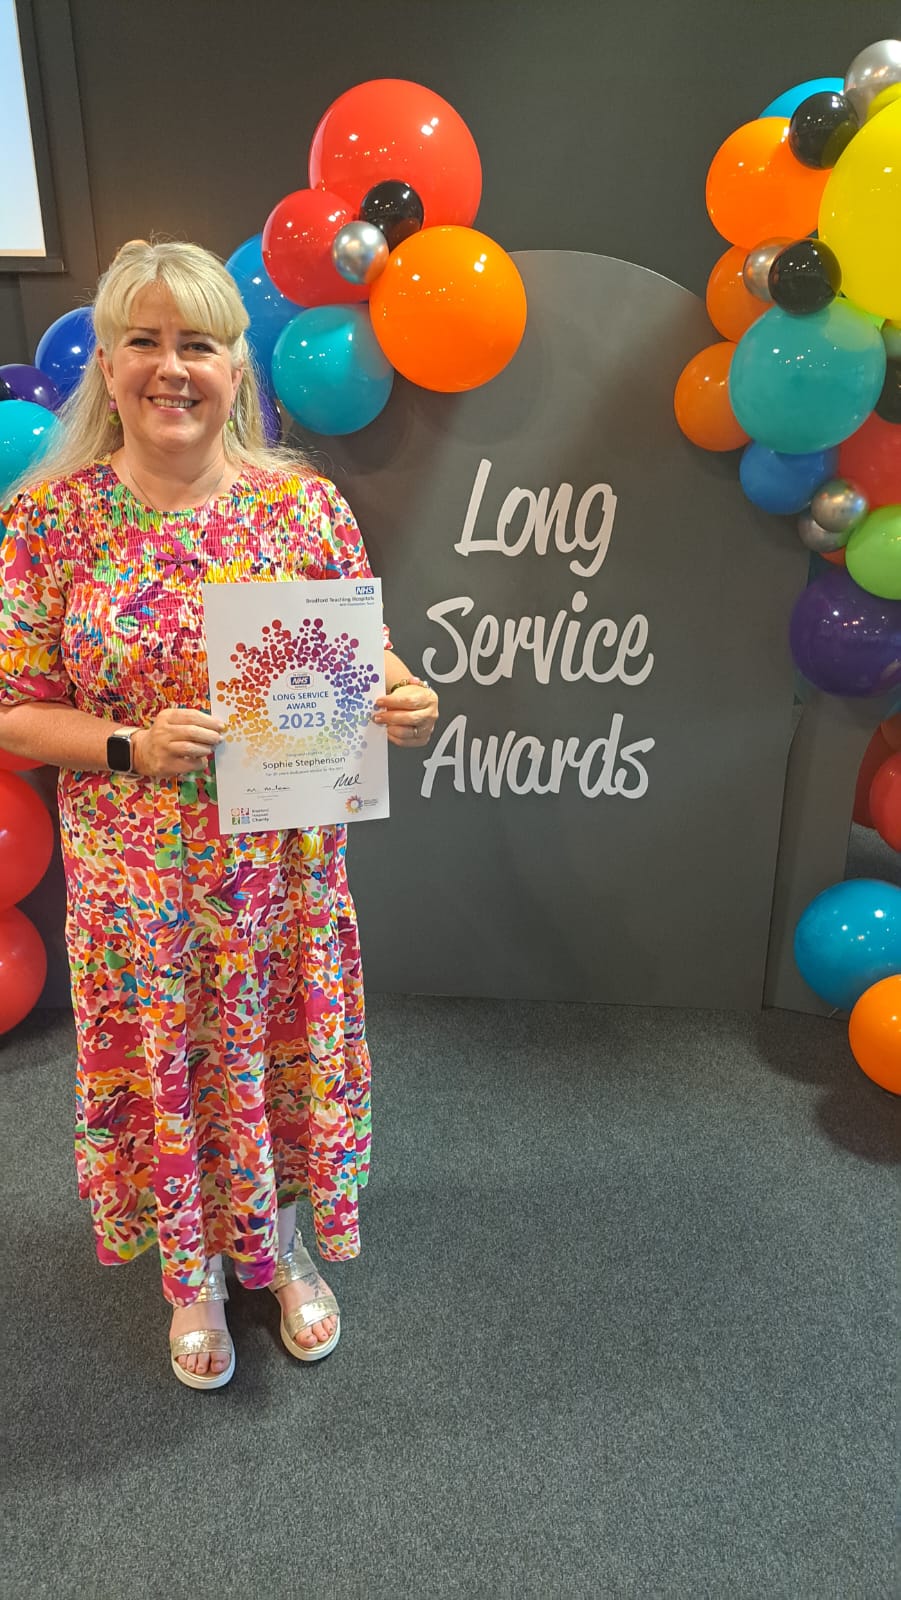 21 years in Research! Hear from Sophie, who’s been awarded for 30 years’ service in the Trust.